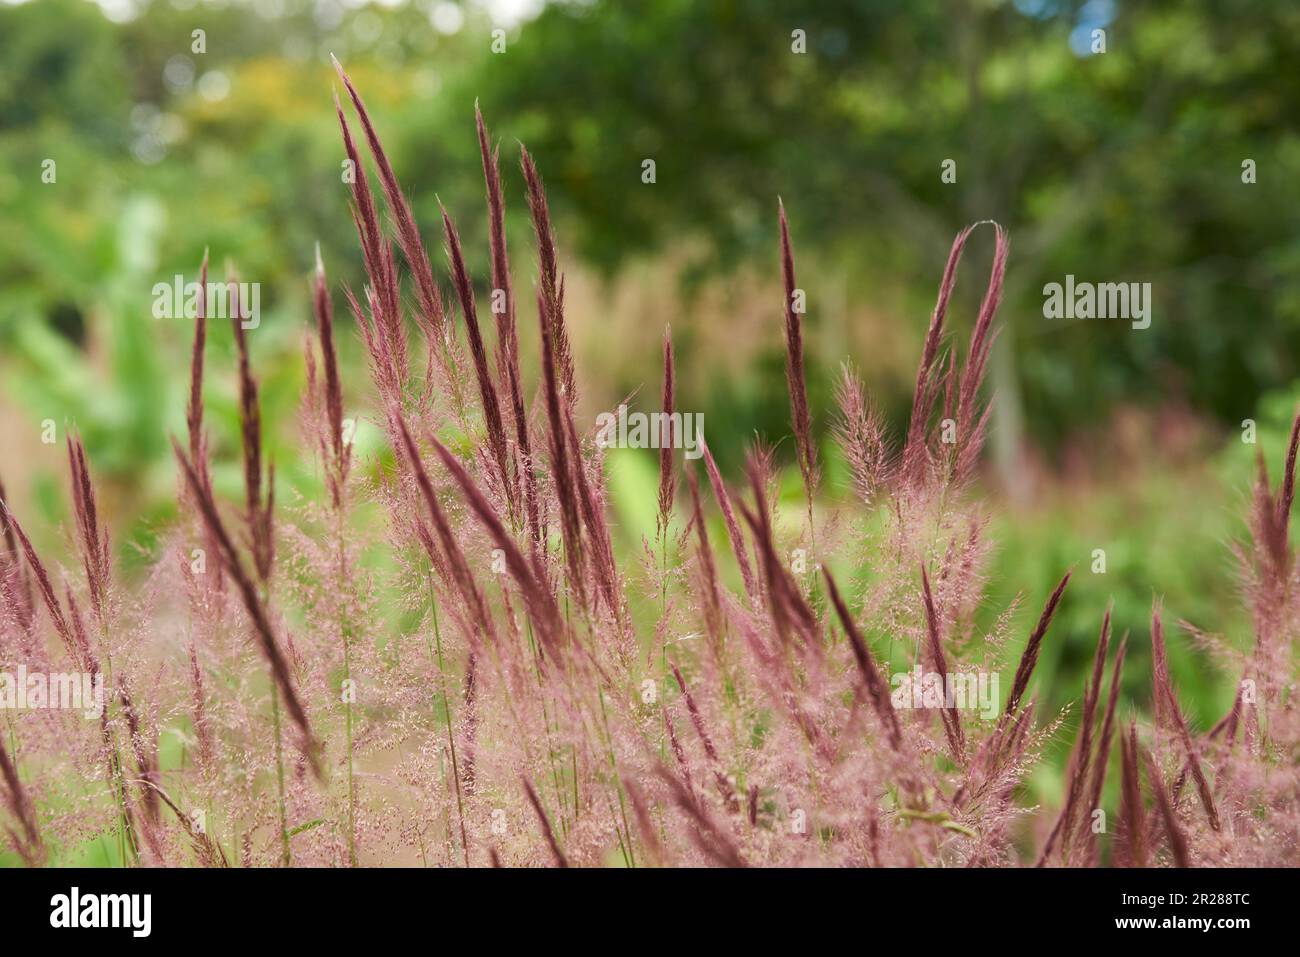 Natural scene, purple spikes on a background of green generic vegetation. Horizontal composition without people with copy space. Stock Photo